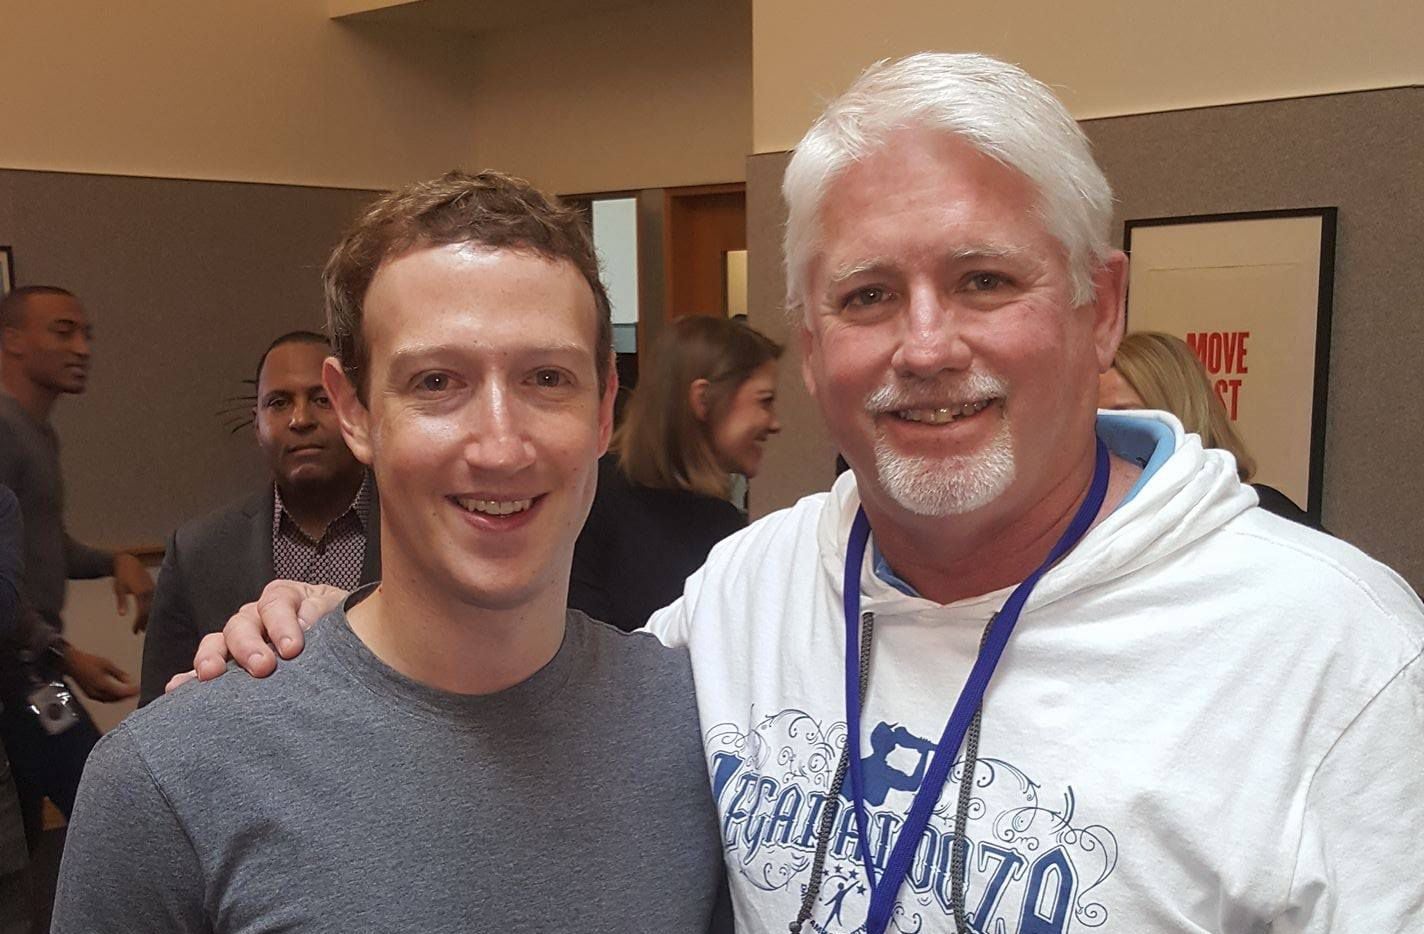 Facebook CEO Mark Zuckerberg (left) and the Dallas Amputee Network's Tommy Donahue.